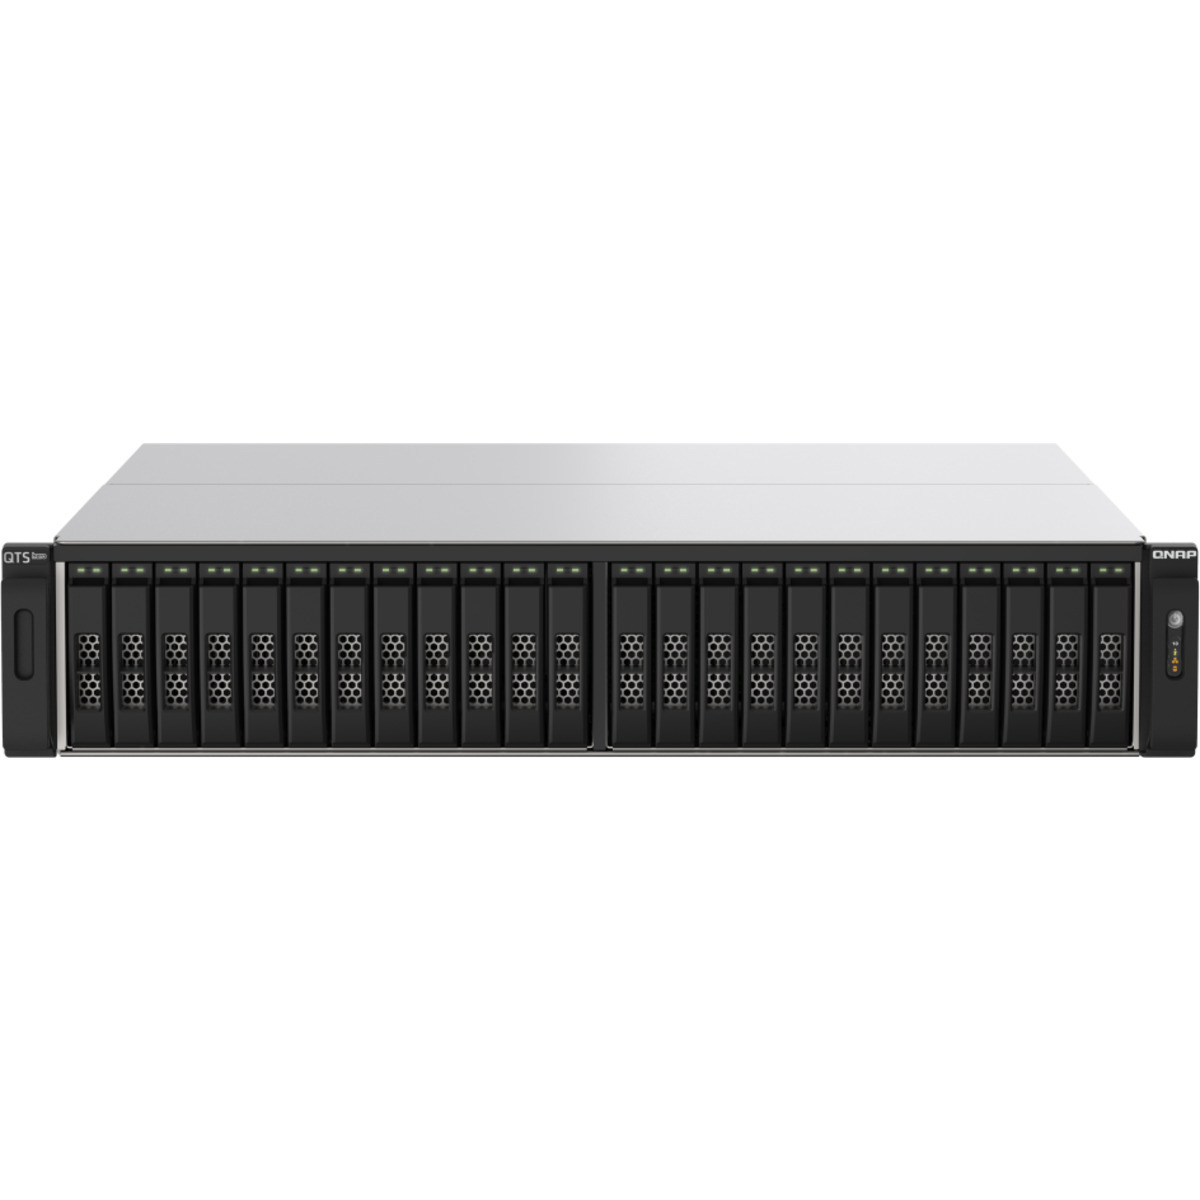 QNAP TS-h2490FU-7302P 11.5tb 24-Bay RackMount Large Business / Enterprise NAS - Network Attached Storage Device 23x500gb Crucial P3 Plus CT500P3PSSD8  4700/1900MB/s M.2 2280 NVMe SSD CONSUMER Class Drives Installed - Burn-In Tested TS-h2490FU-7302P